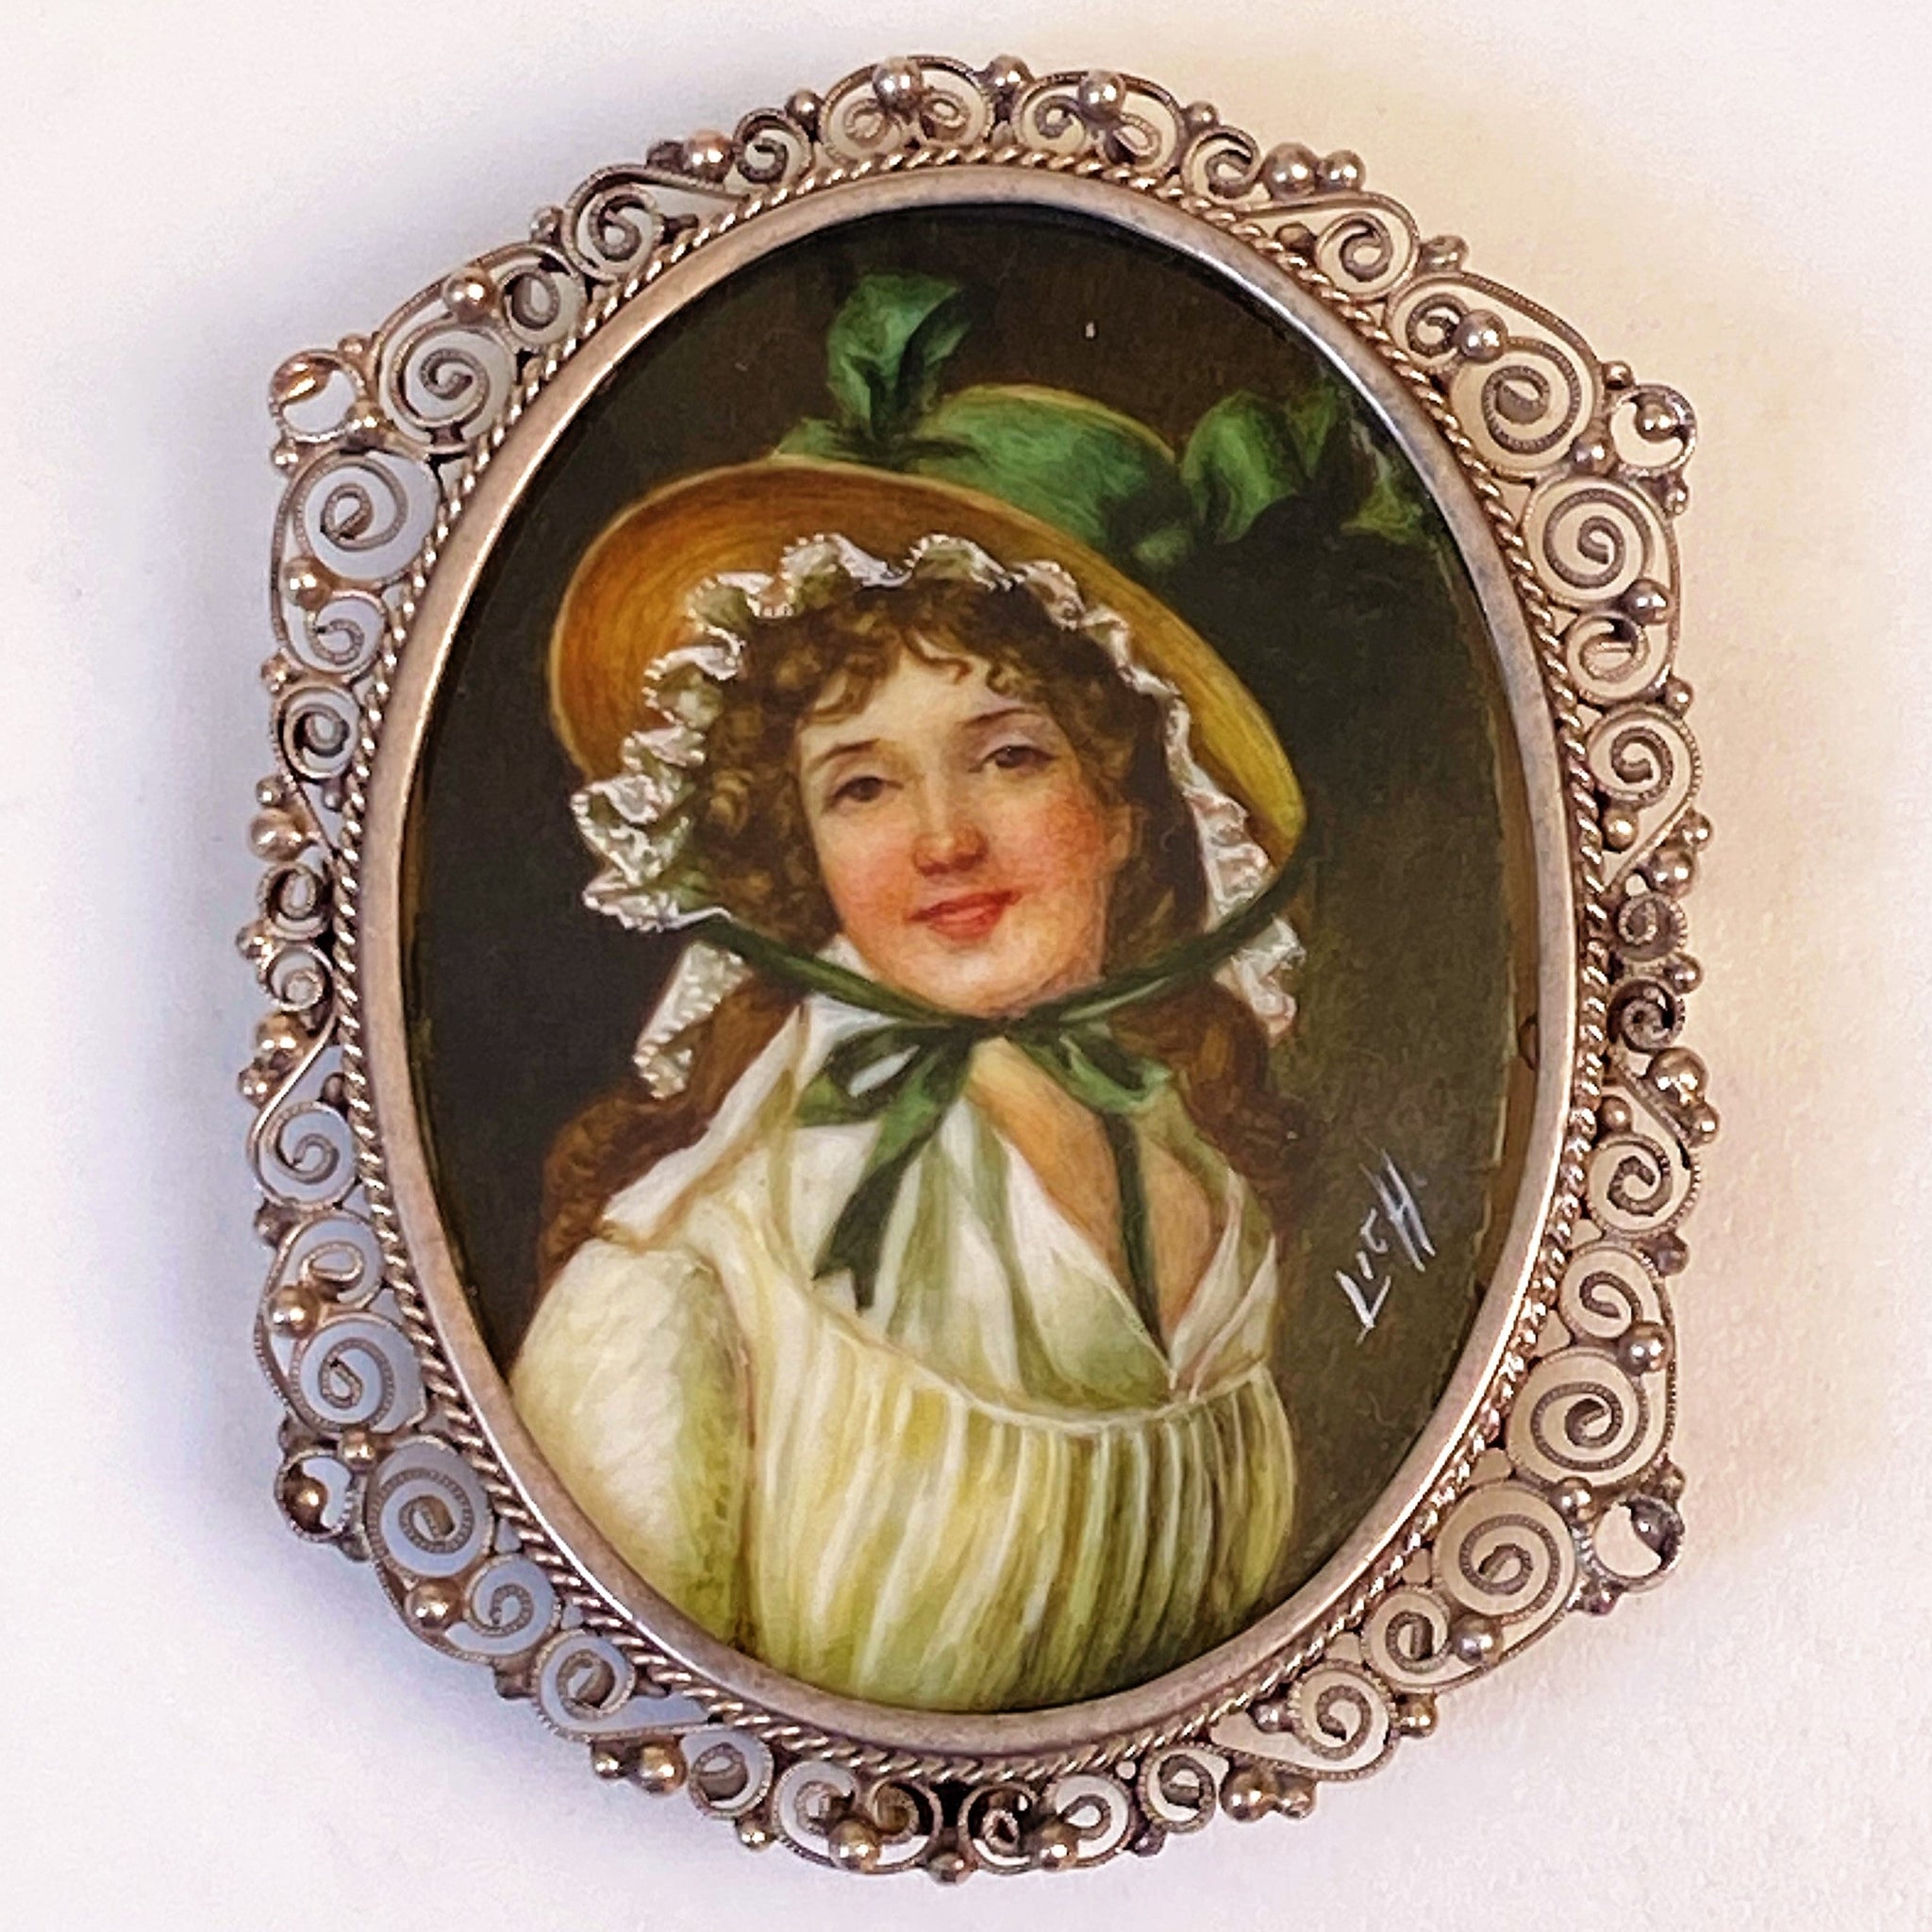 Antique Silver Brooch with Hand-painted Miniature of a Lady